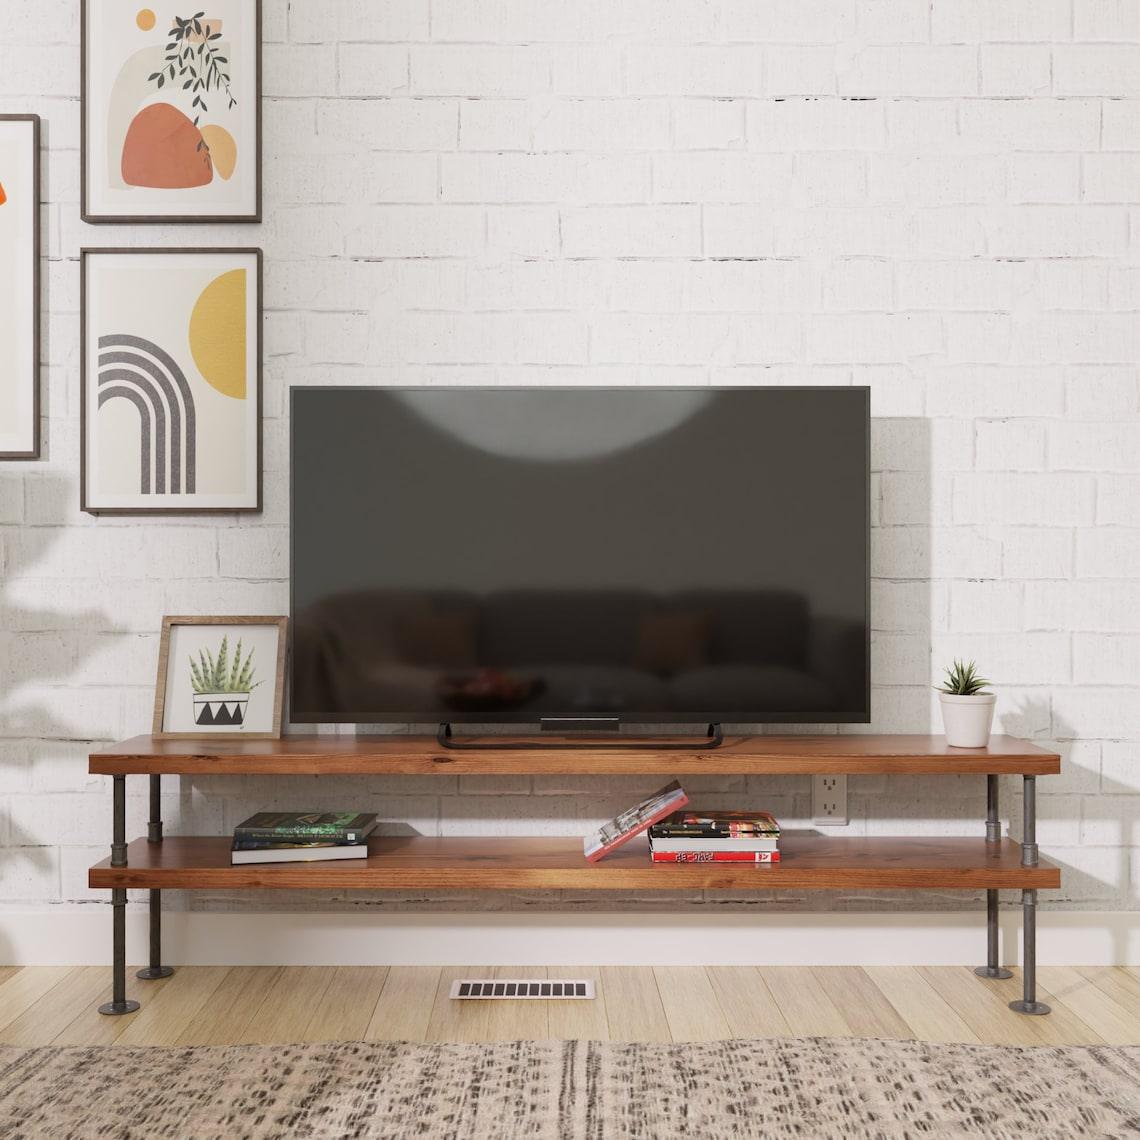 2-Tier Industrial Pipe and wood TV stand, Media console - Woodartdeal